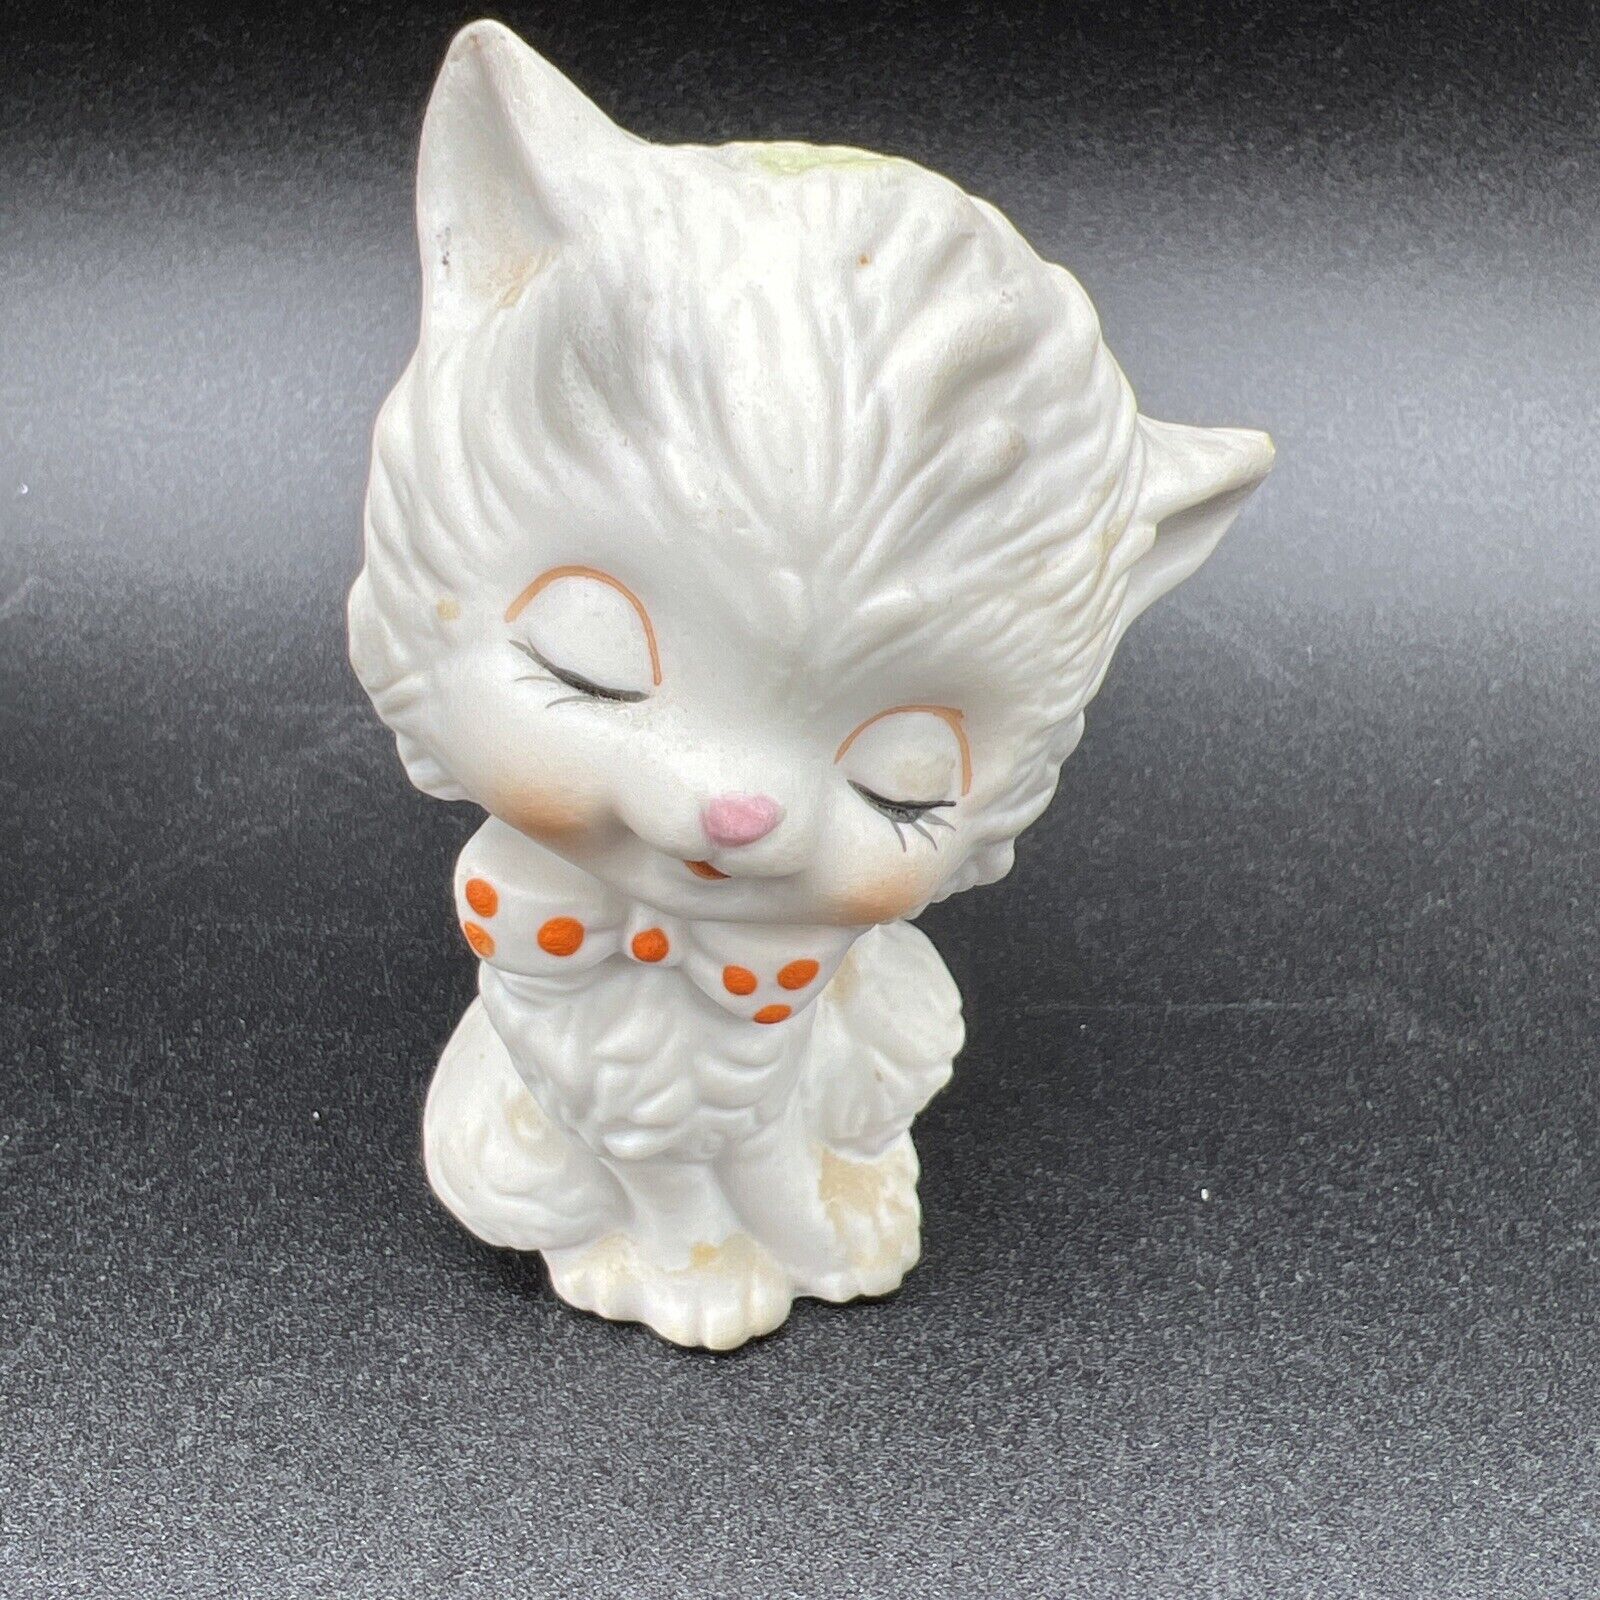 Vintage Napcoware Cat Kitten With Spotted Bow Tie Figurine Bottom Marked 8152